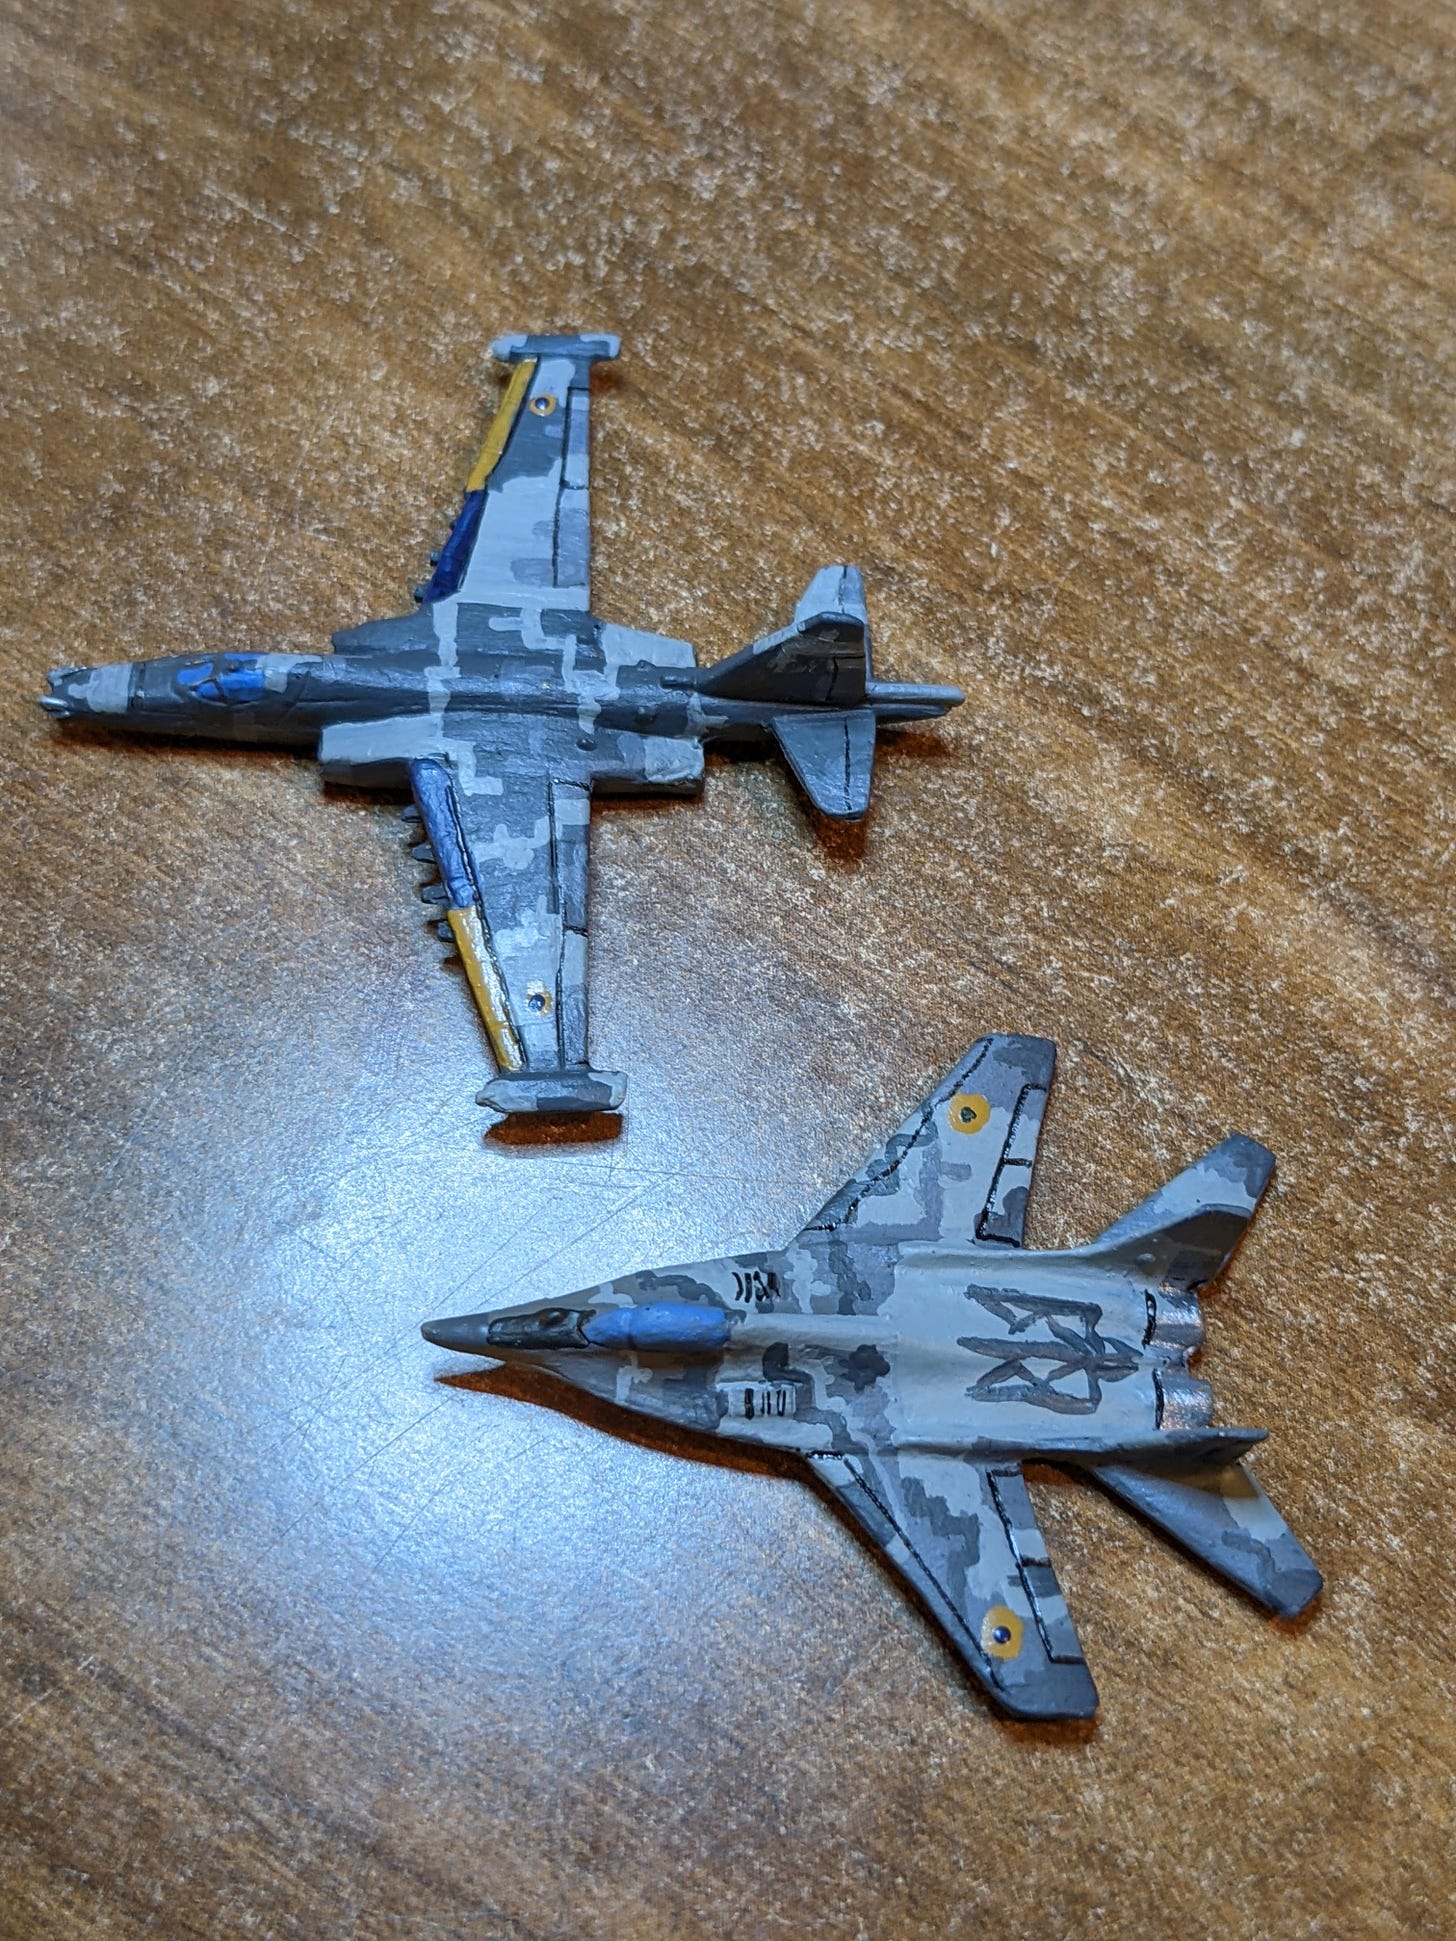 2 x 6 mm scale models, one a SU-25 ground attack fighter and the other a MIG 29.  They are both painted in grey digital camo of the Ukrainian Airforce